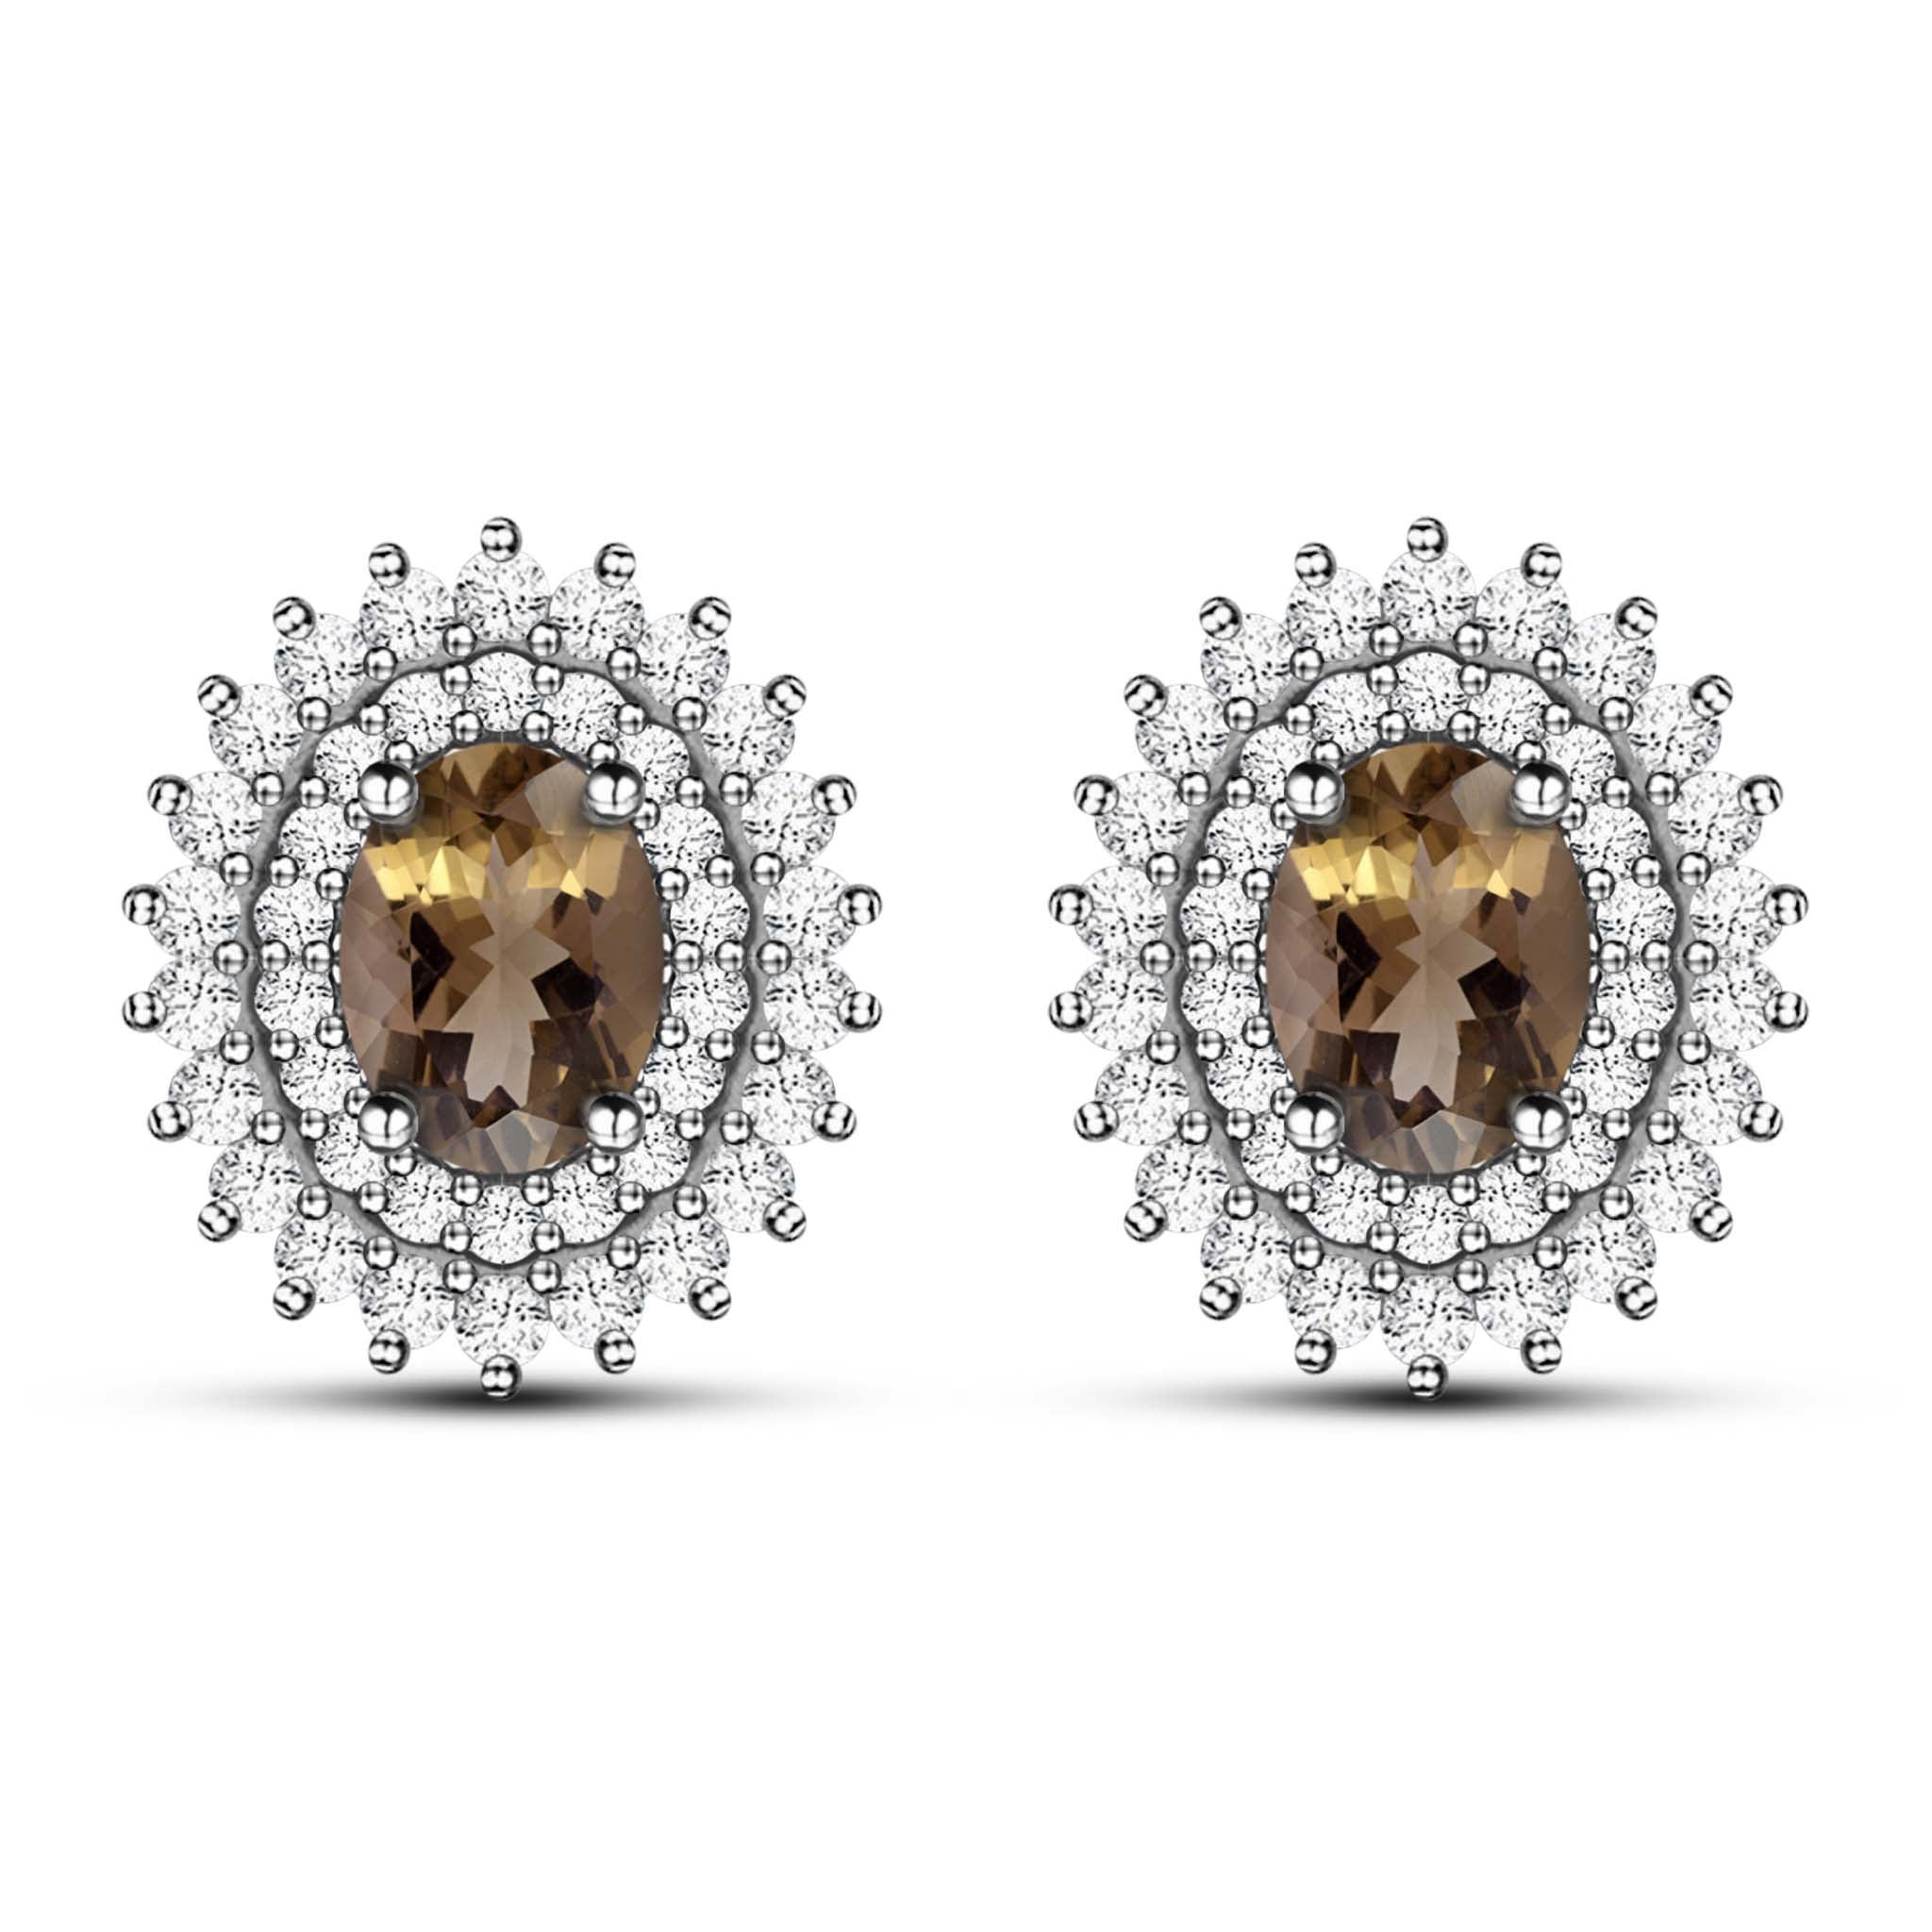 Dazzling Dianna Style Natural Oval Smoky Quartz Sterling Silver Stud Earrings